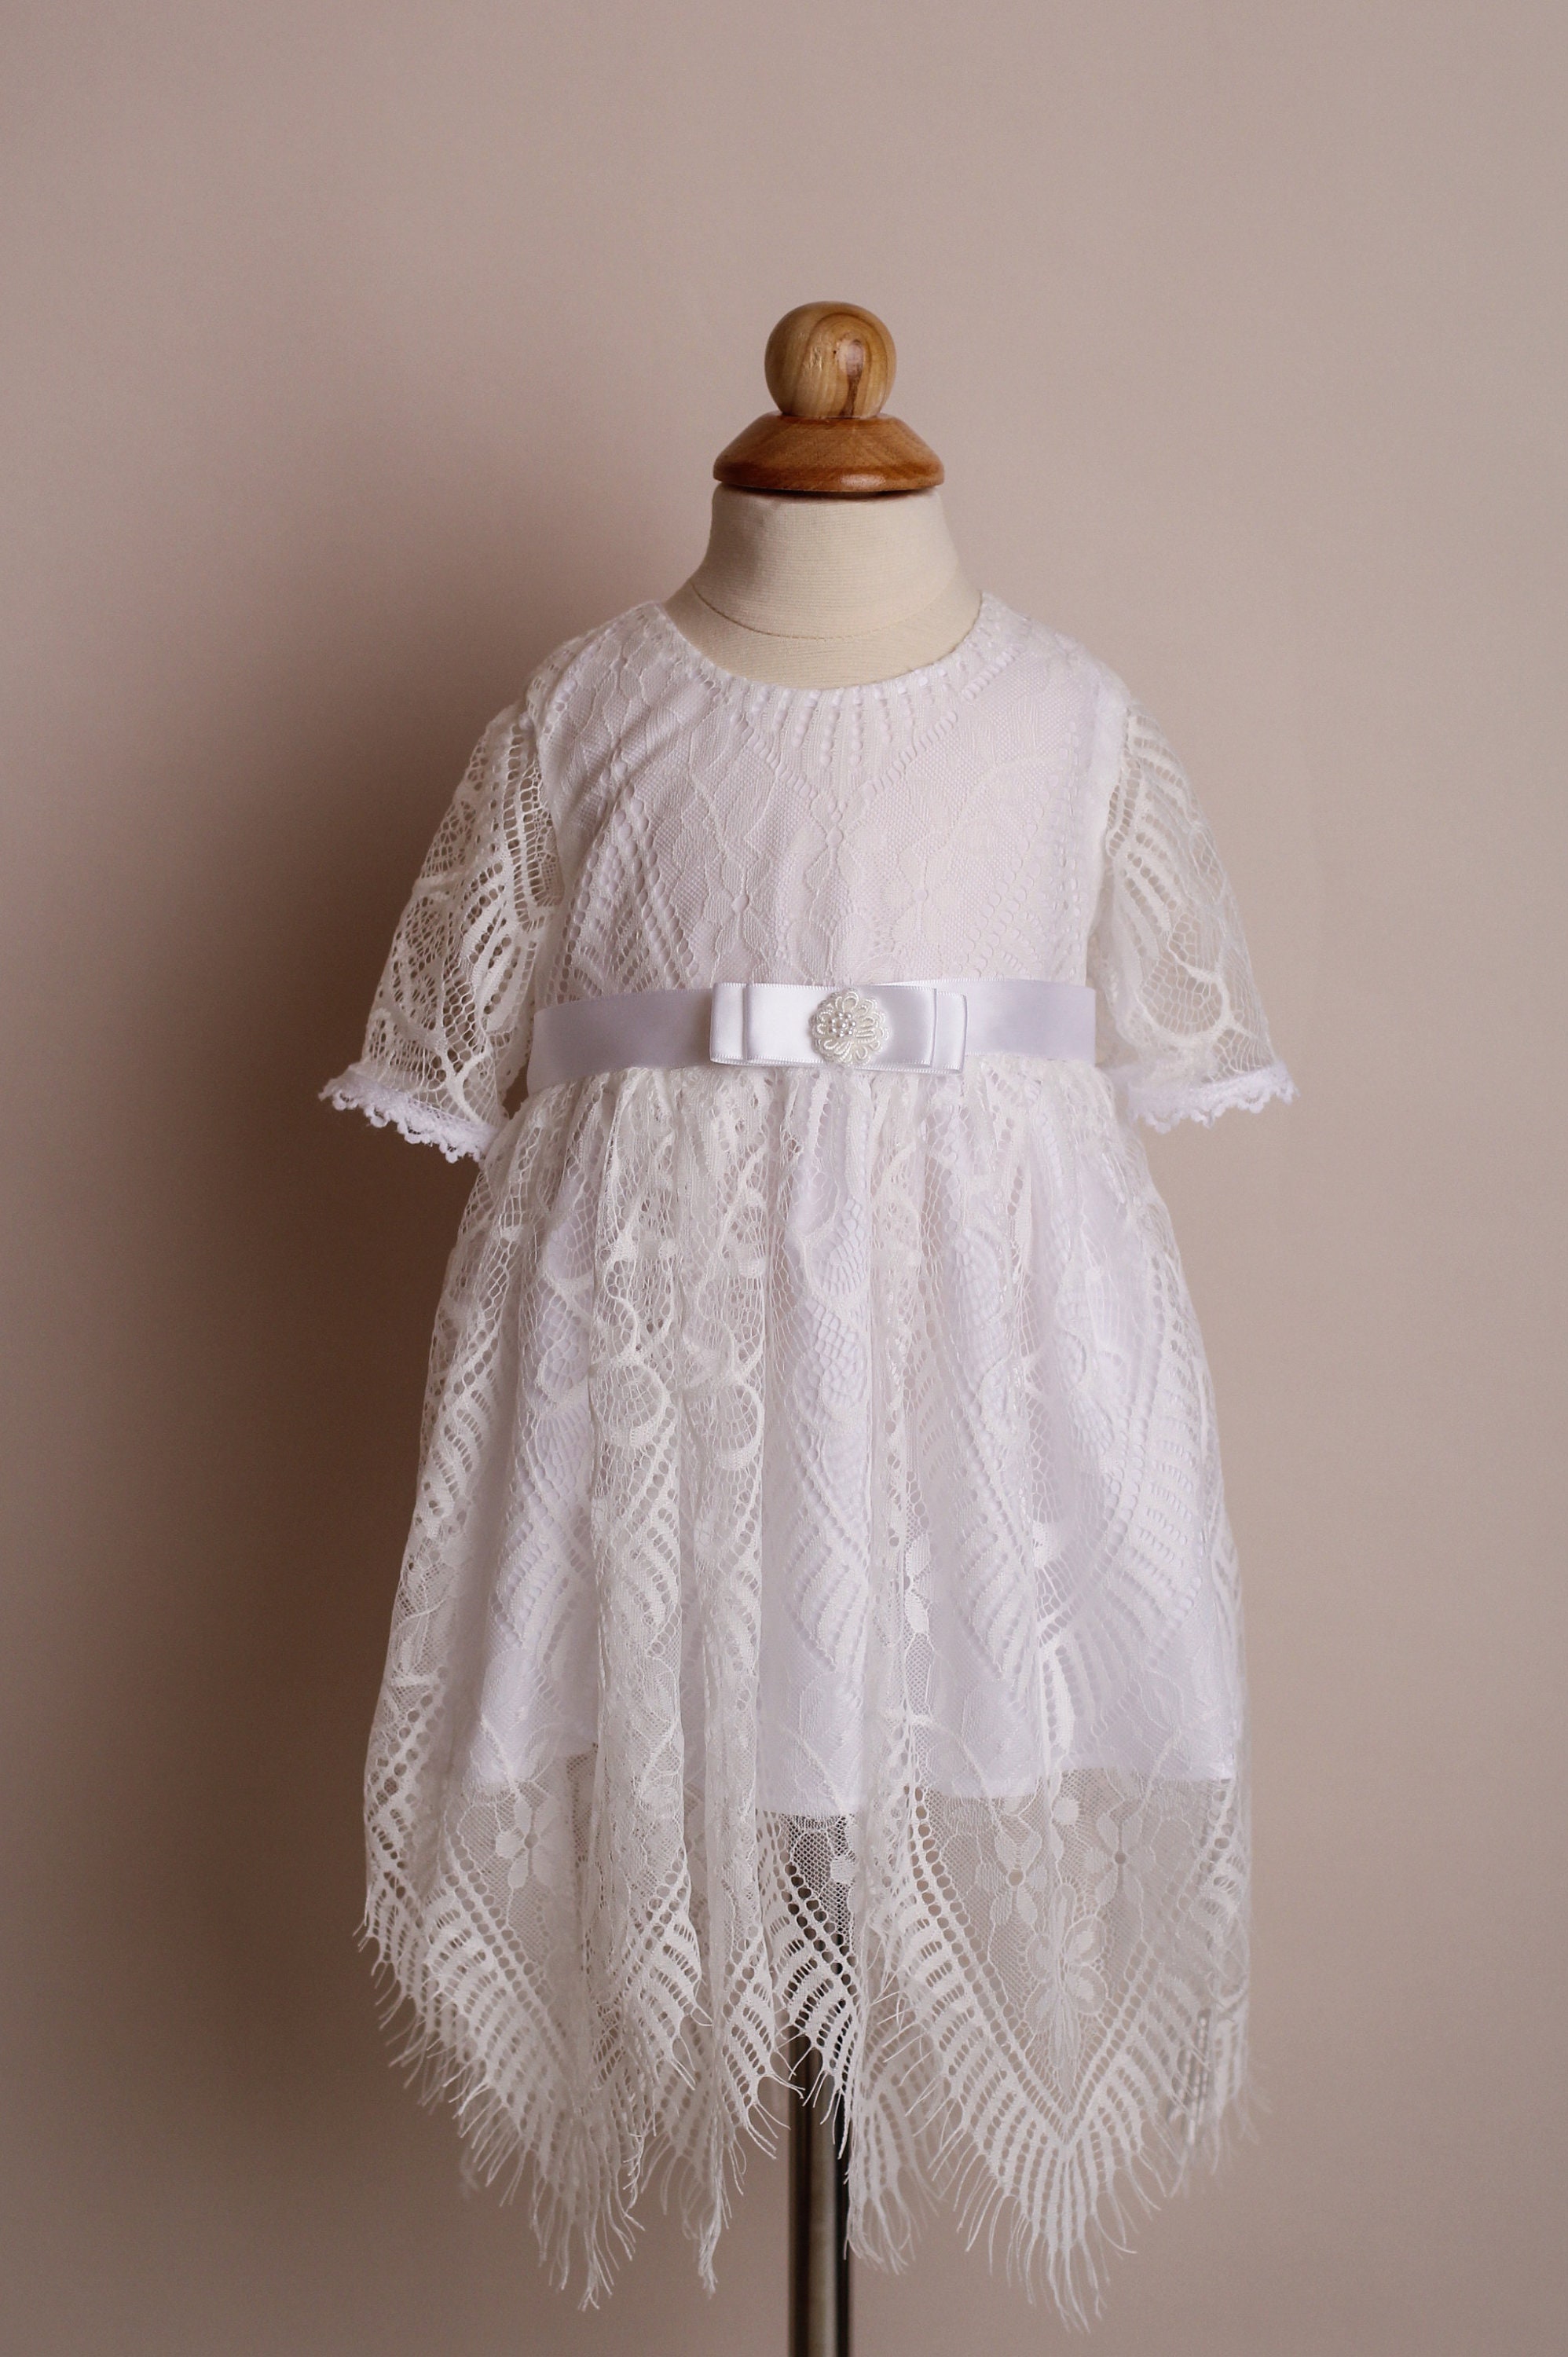 Baby Boy Christening Gowns Pattern by Ginger Snaps Designs - Etsy